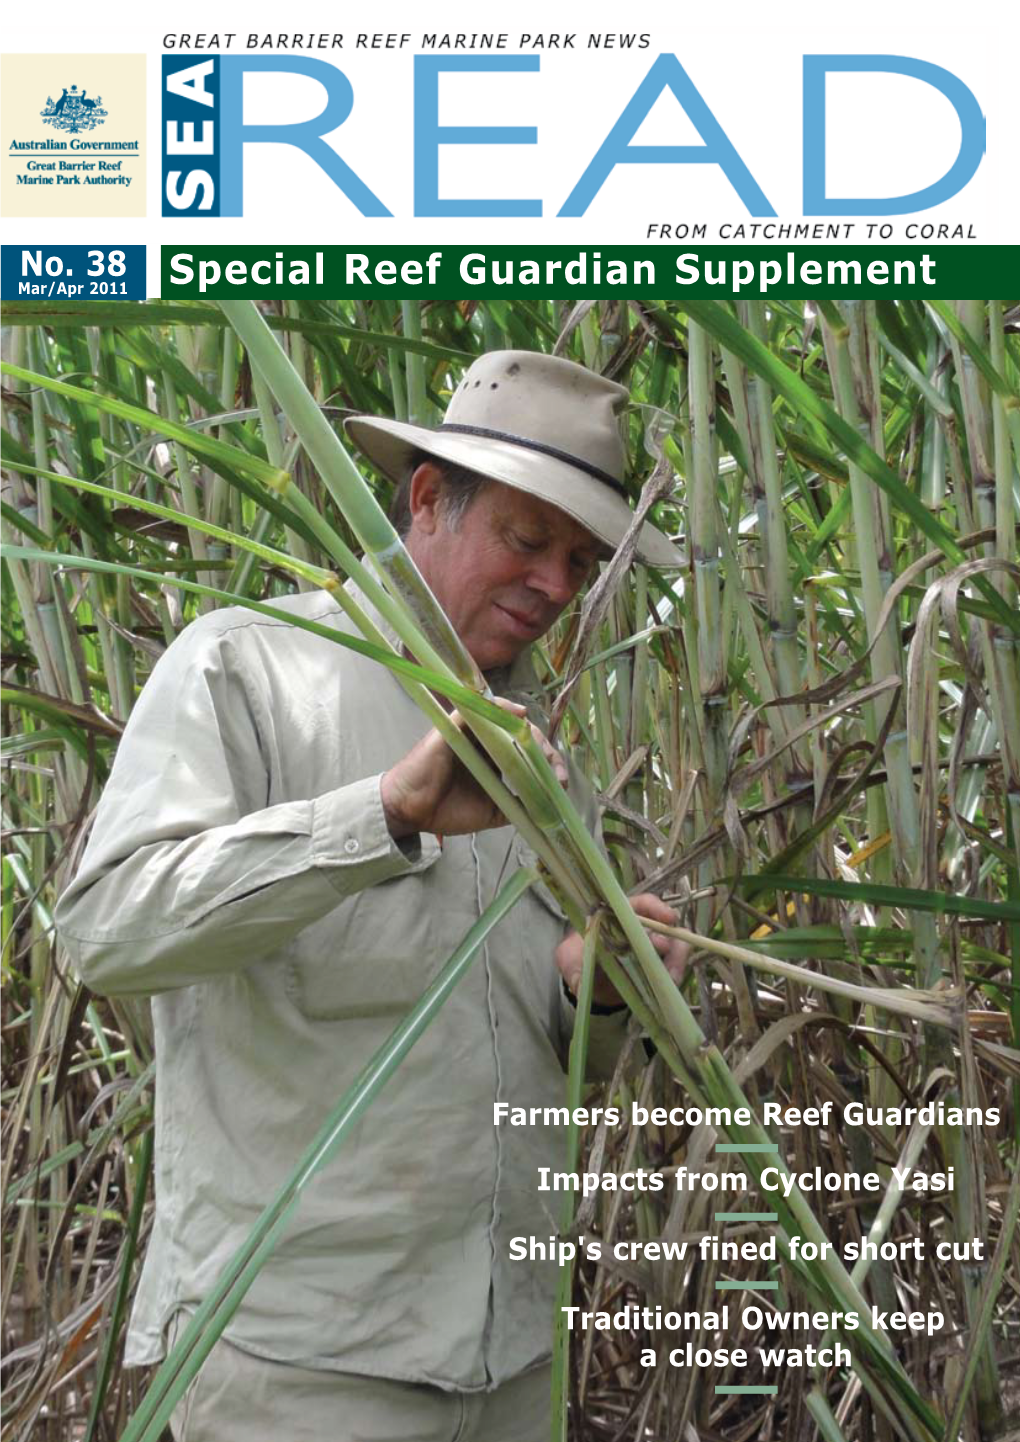 Special Reef Guardian Supplement